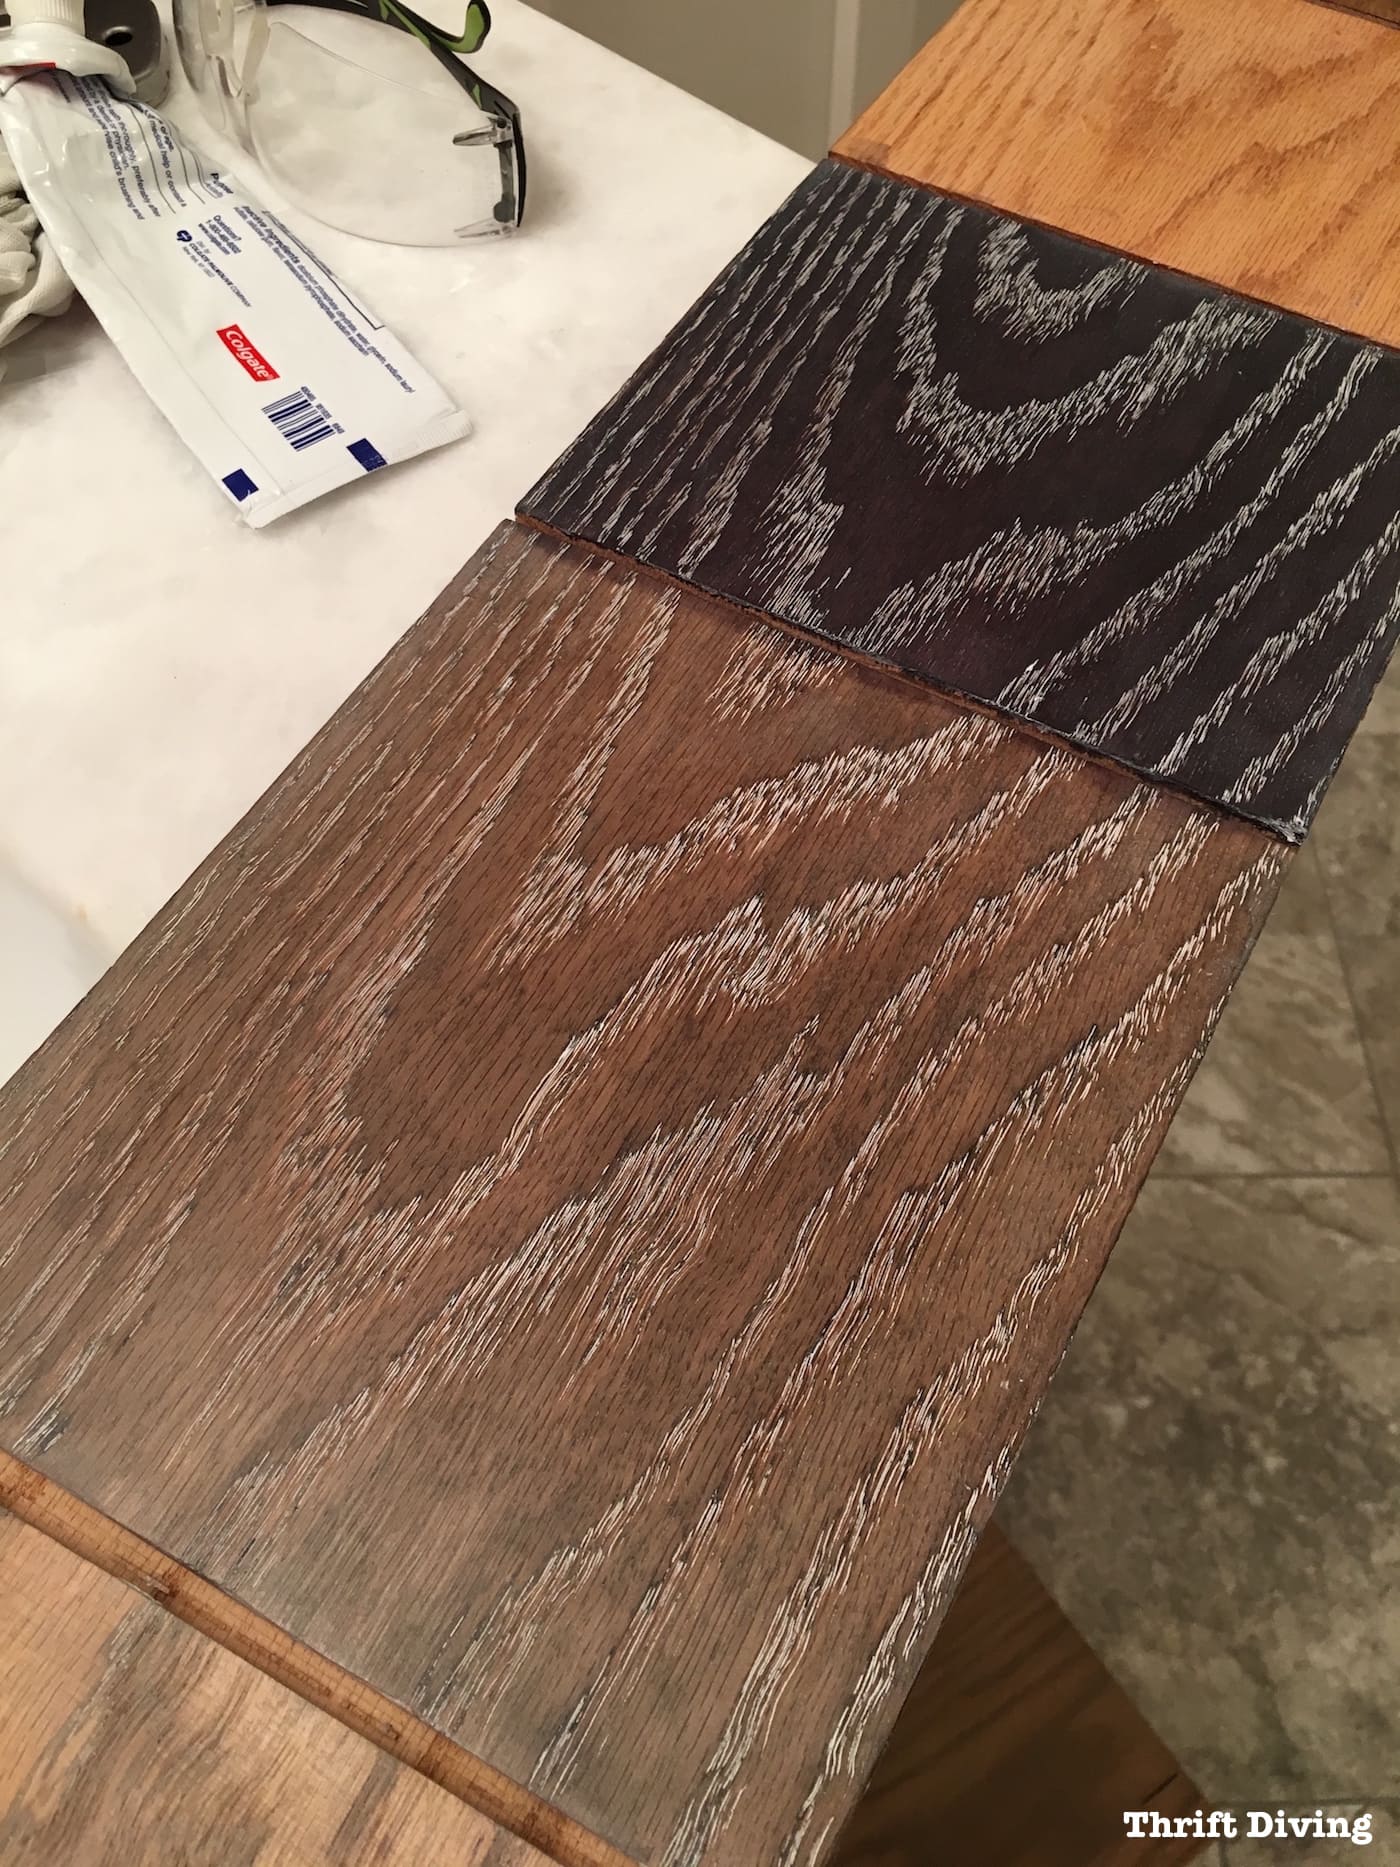 Thrift Diving: the effects of liming wax on stained wood